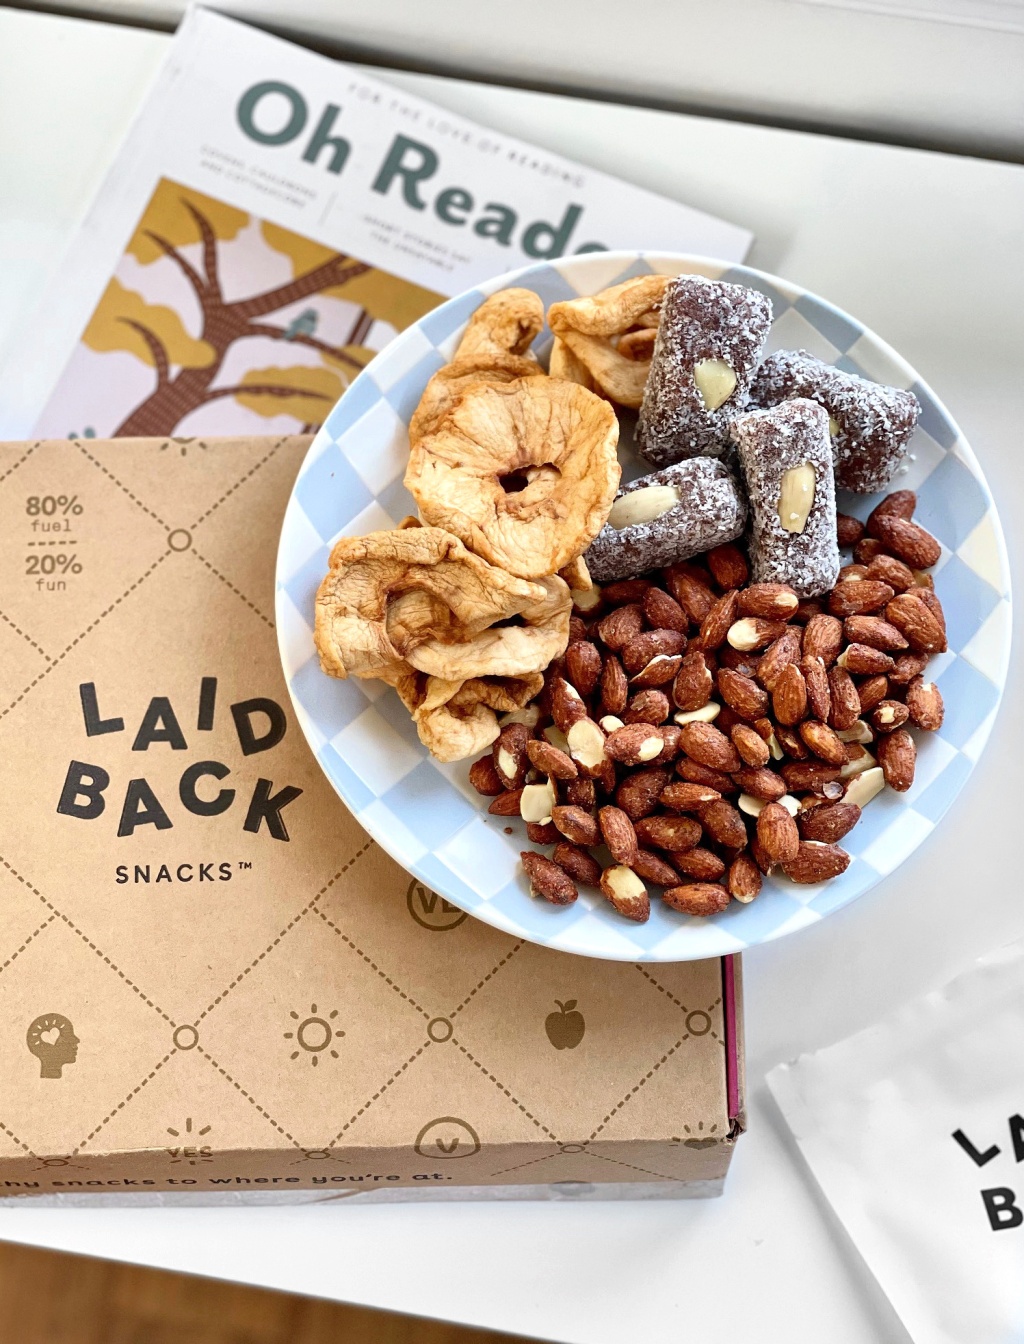 We scarf down this healthy snack subscription box every month